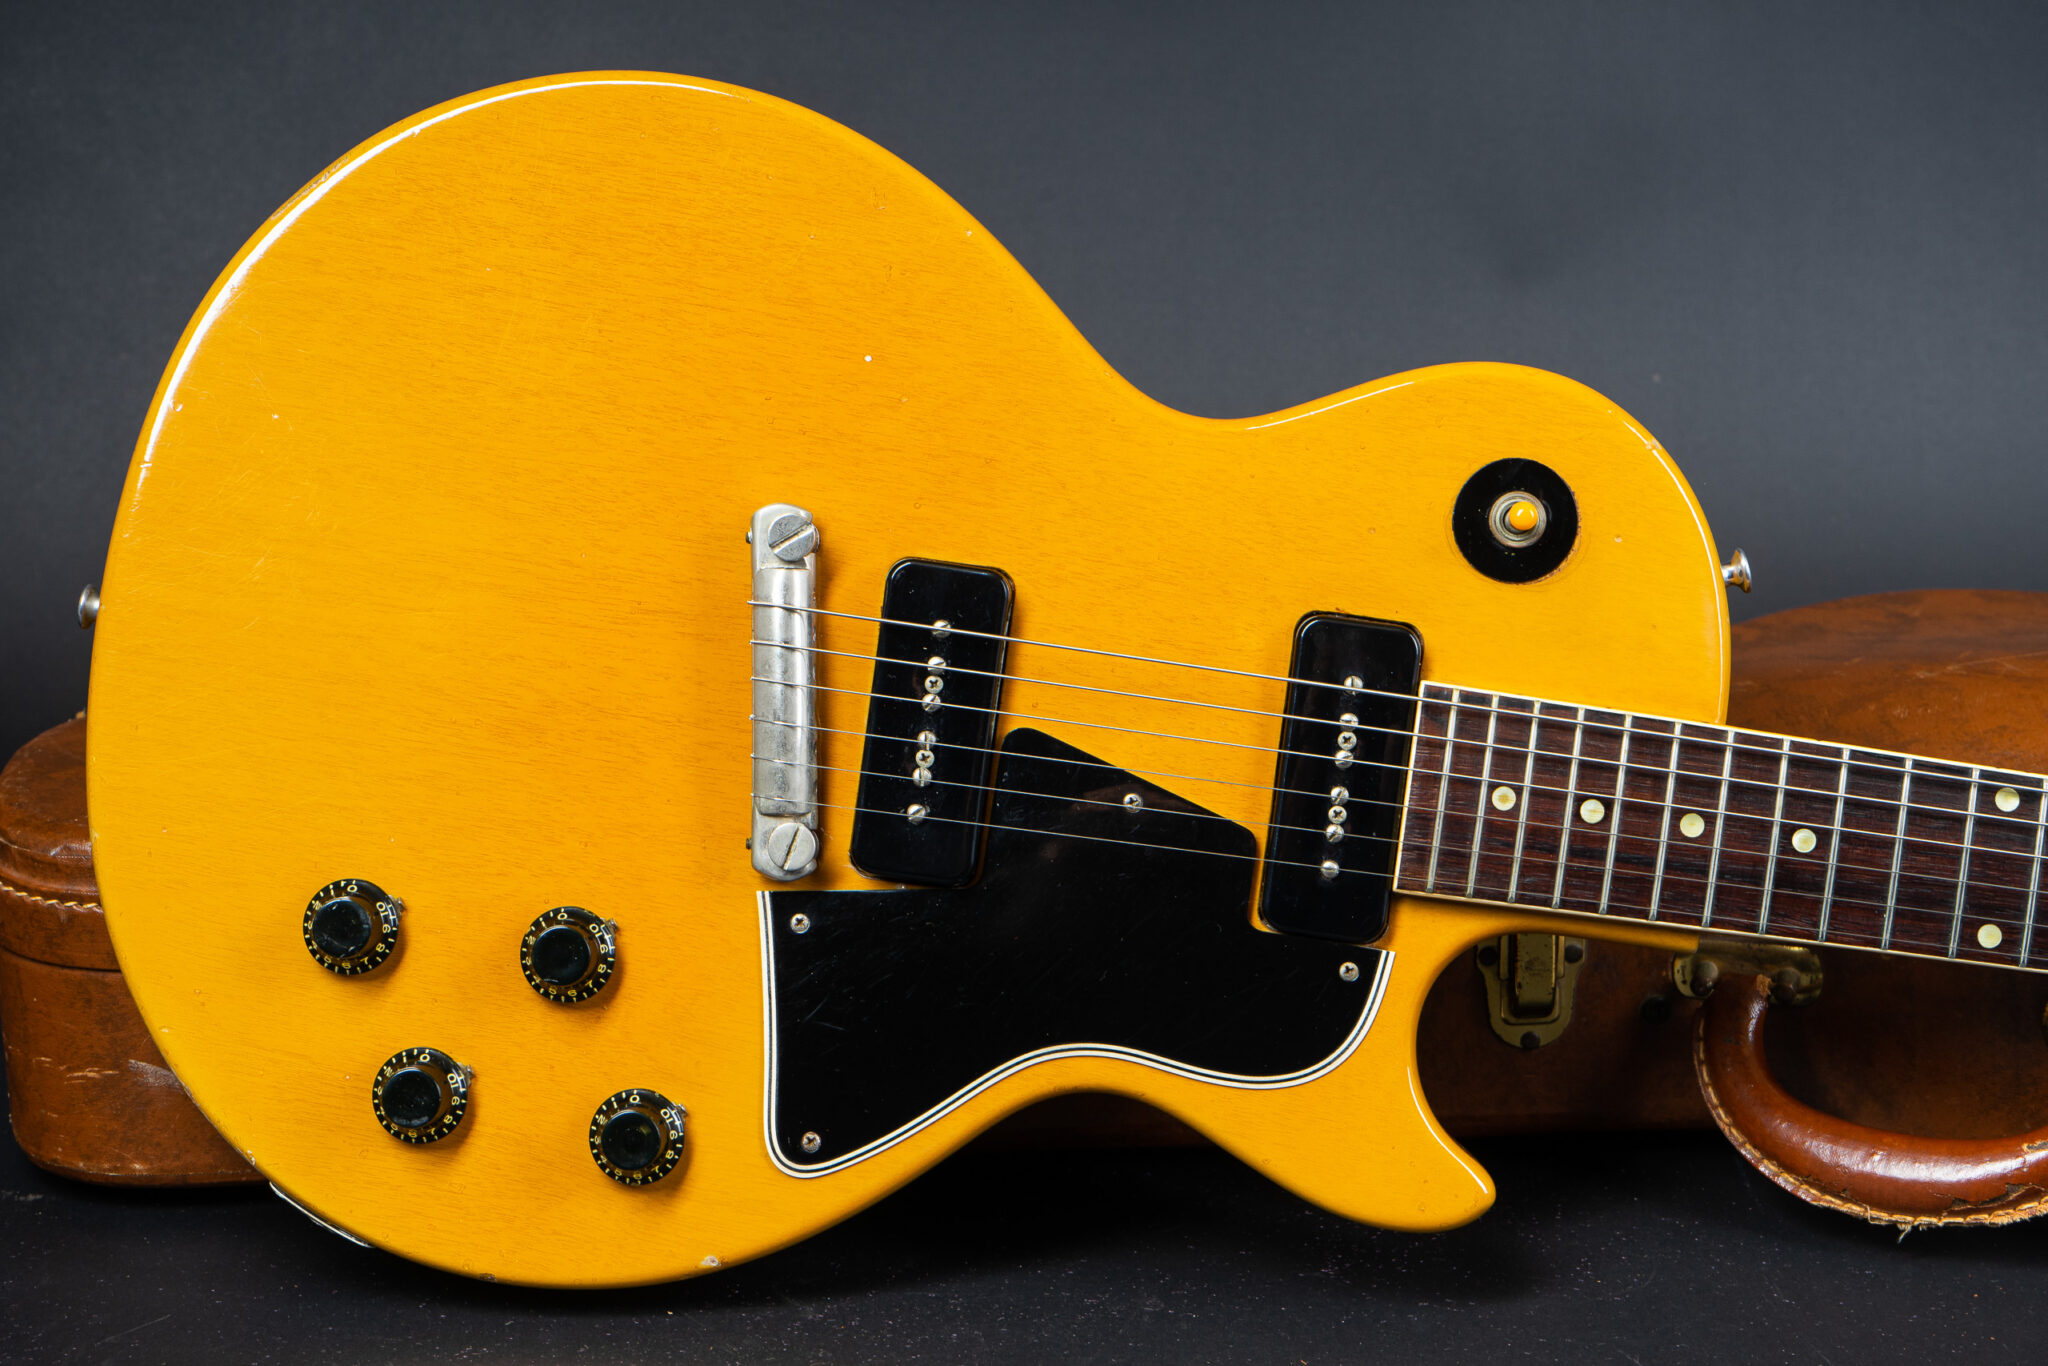 https://guitarpoint.de/app/uploads/products/1957-gibson-les-paul-special-tv-yellow-7/1957-Gibson-Les-Paul-Special-70197-9-2048x1366.jpg